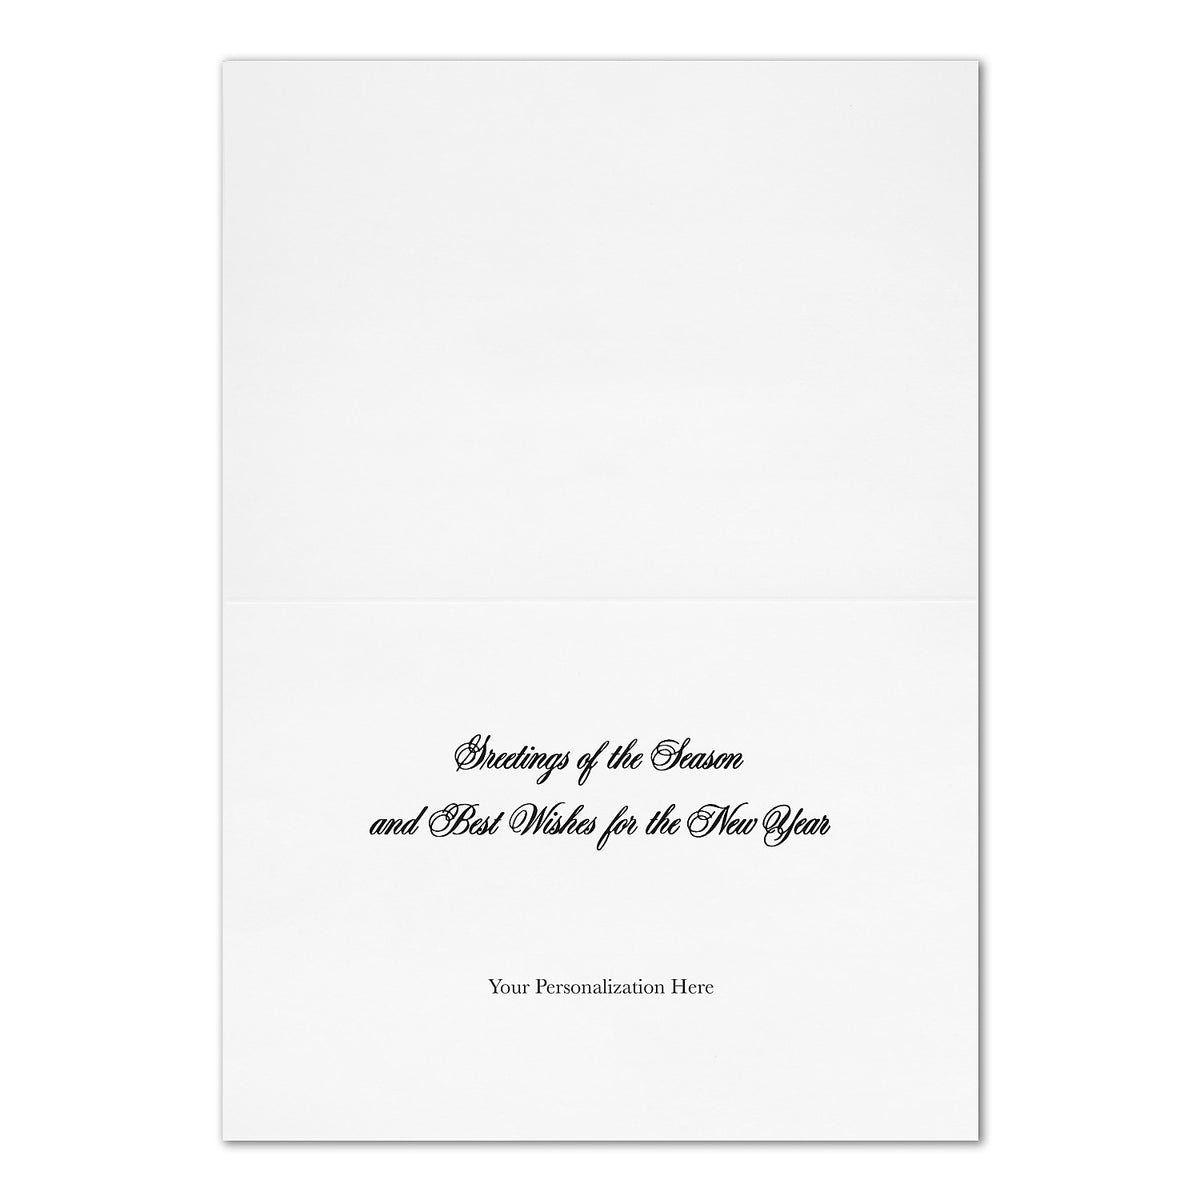 "Elegant Image" Holiday Card w/ Fastick Silver Lined White Envelope, 100/BX